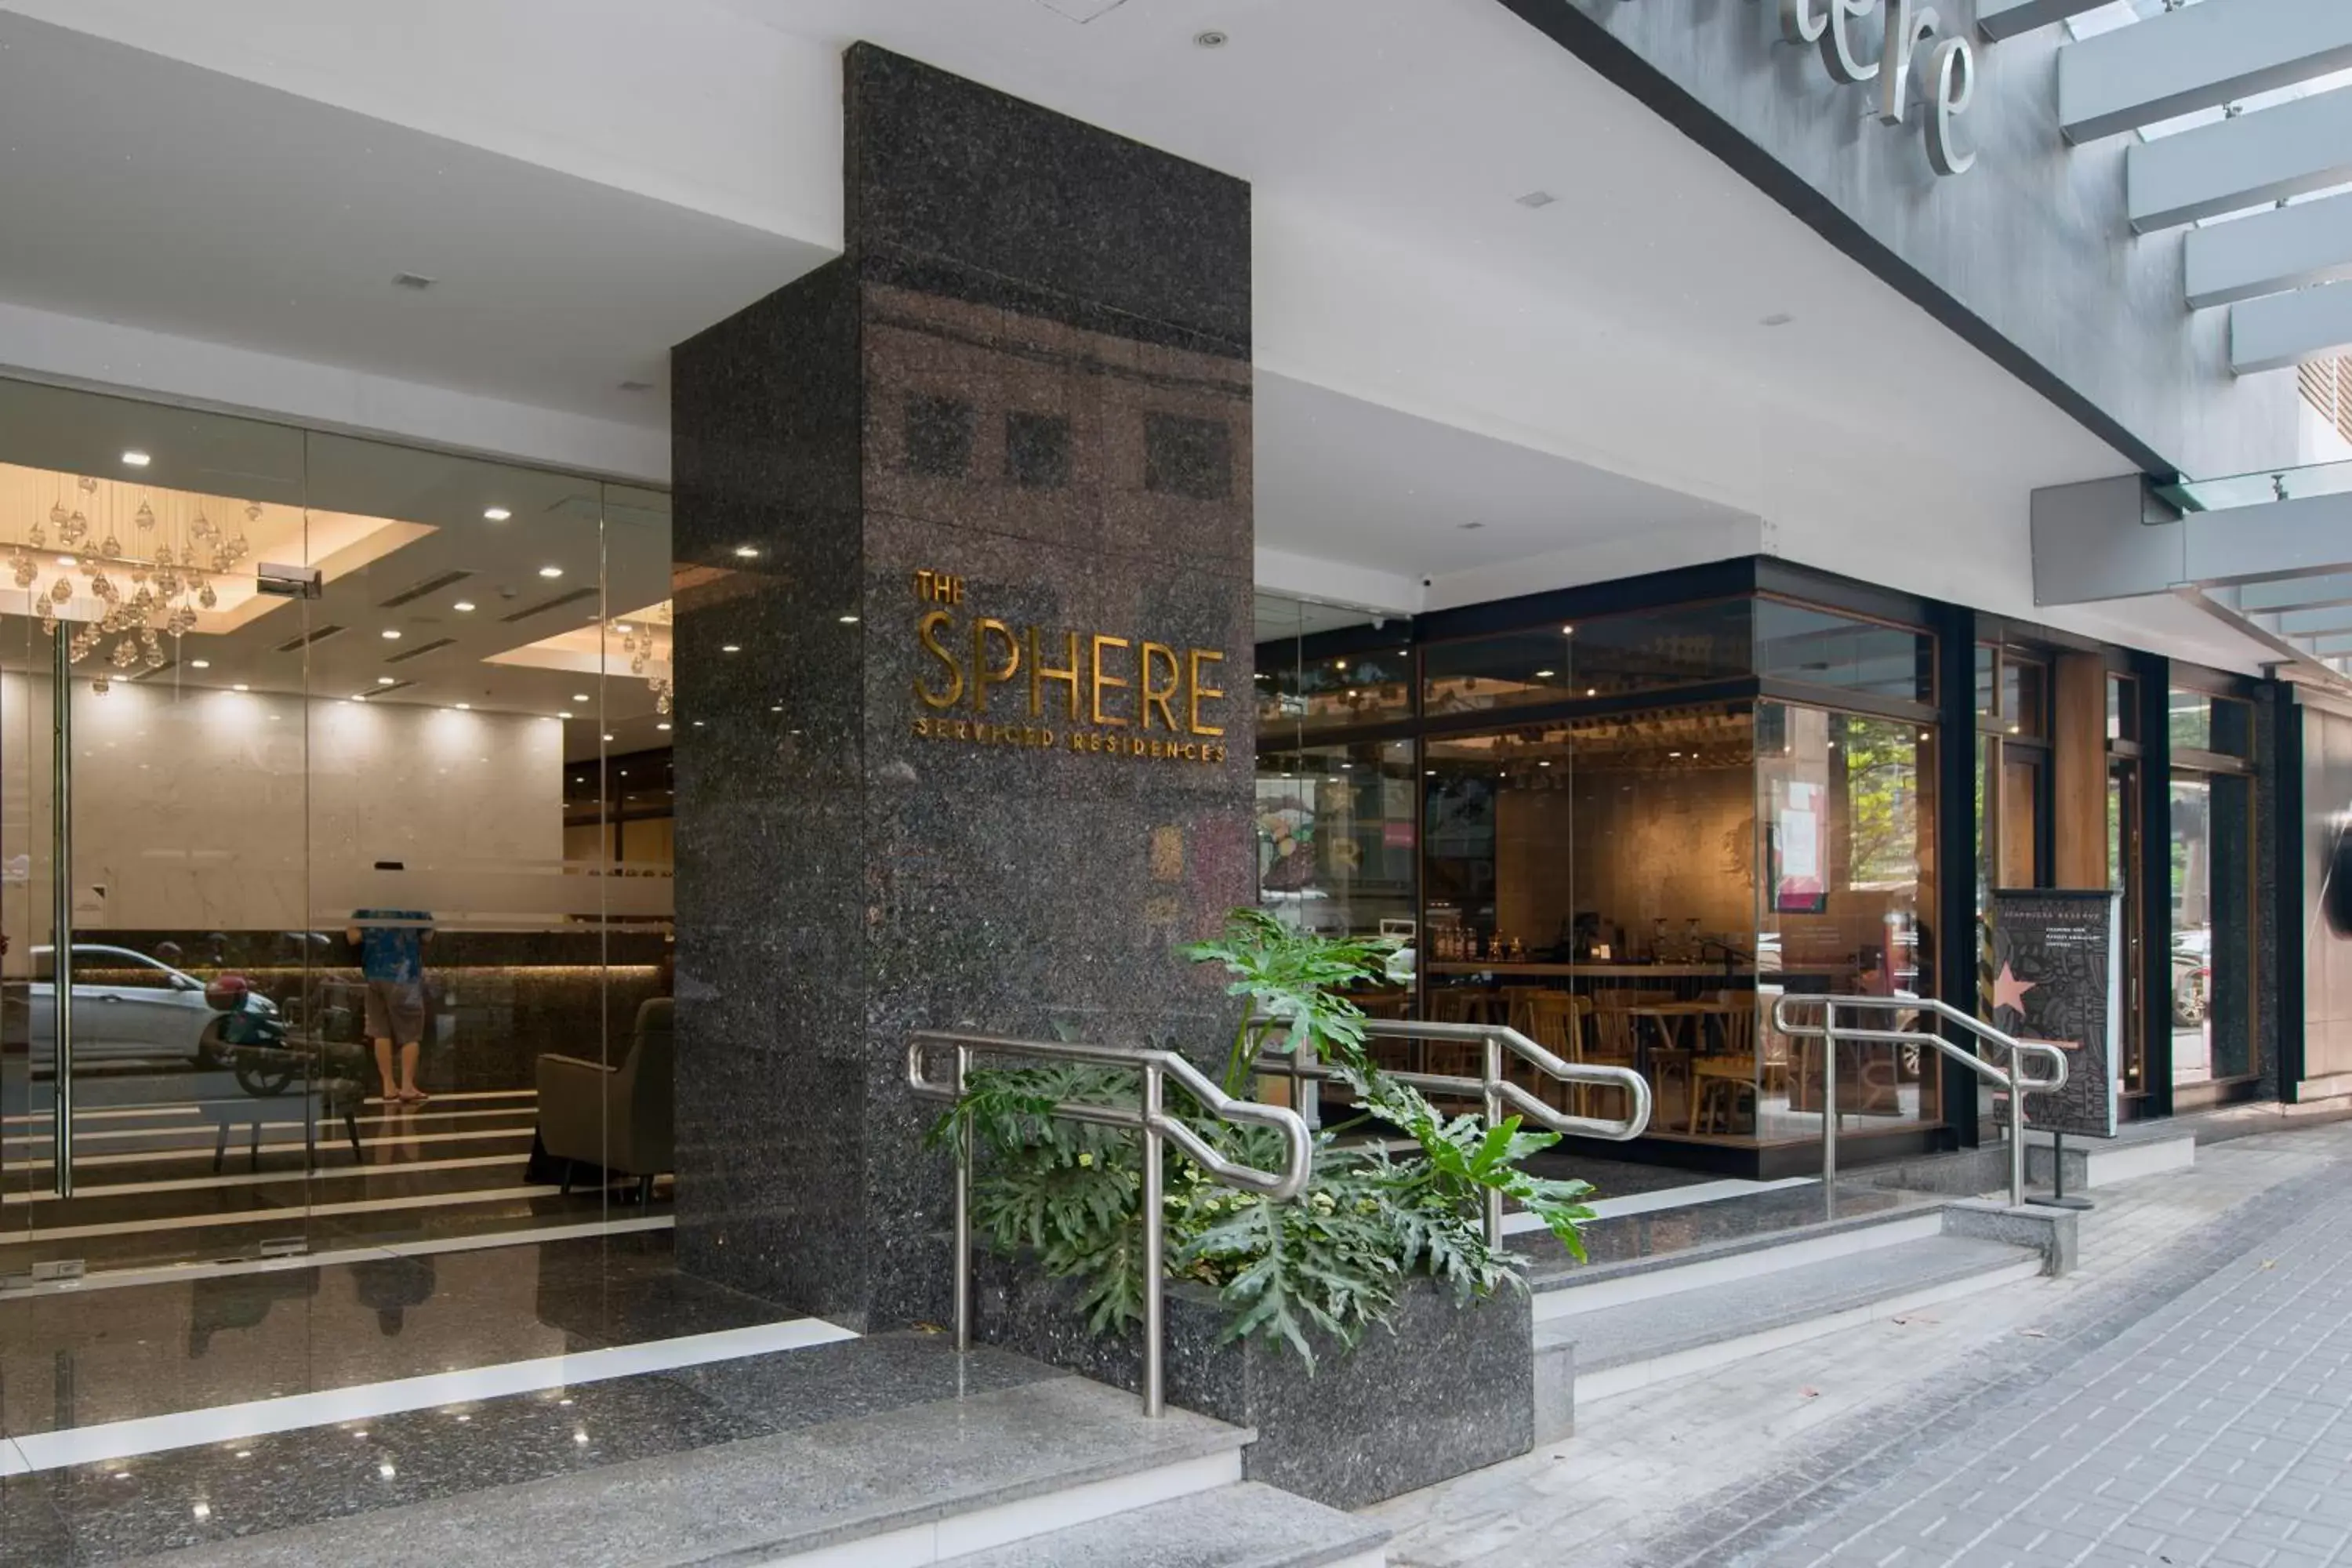 Facade/entrance in The Sphere Serviced Residences Managed by HII